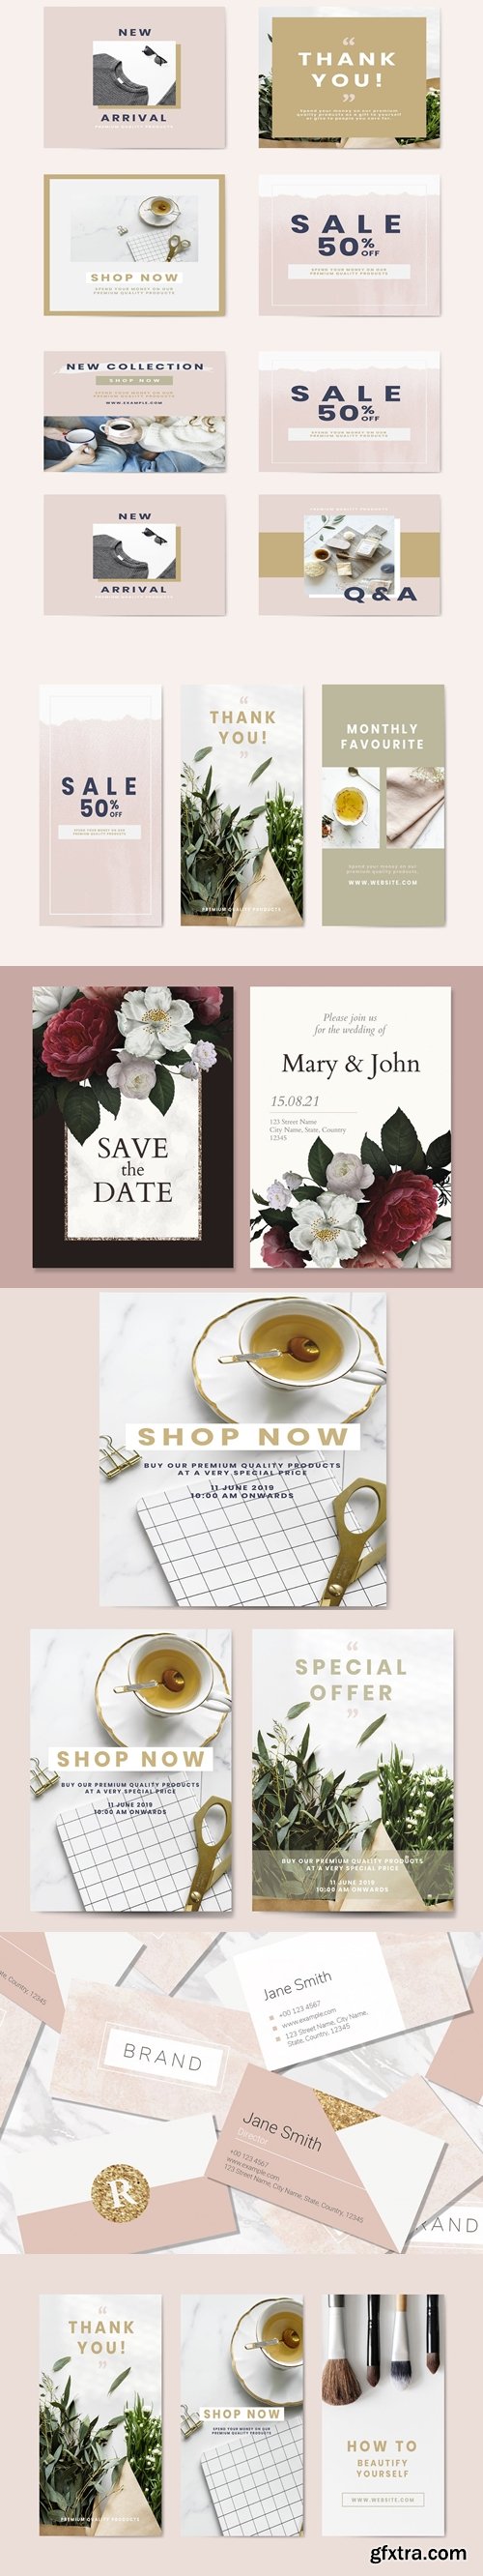 Shopping and sale advertisement Template and Business Card